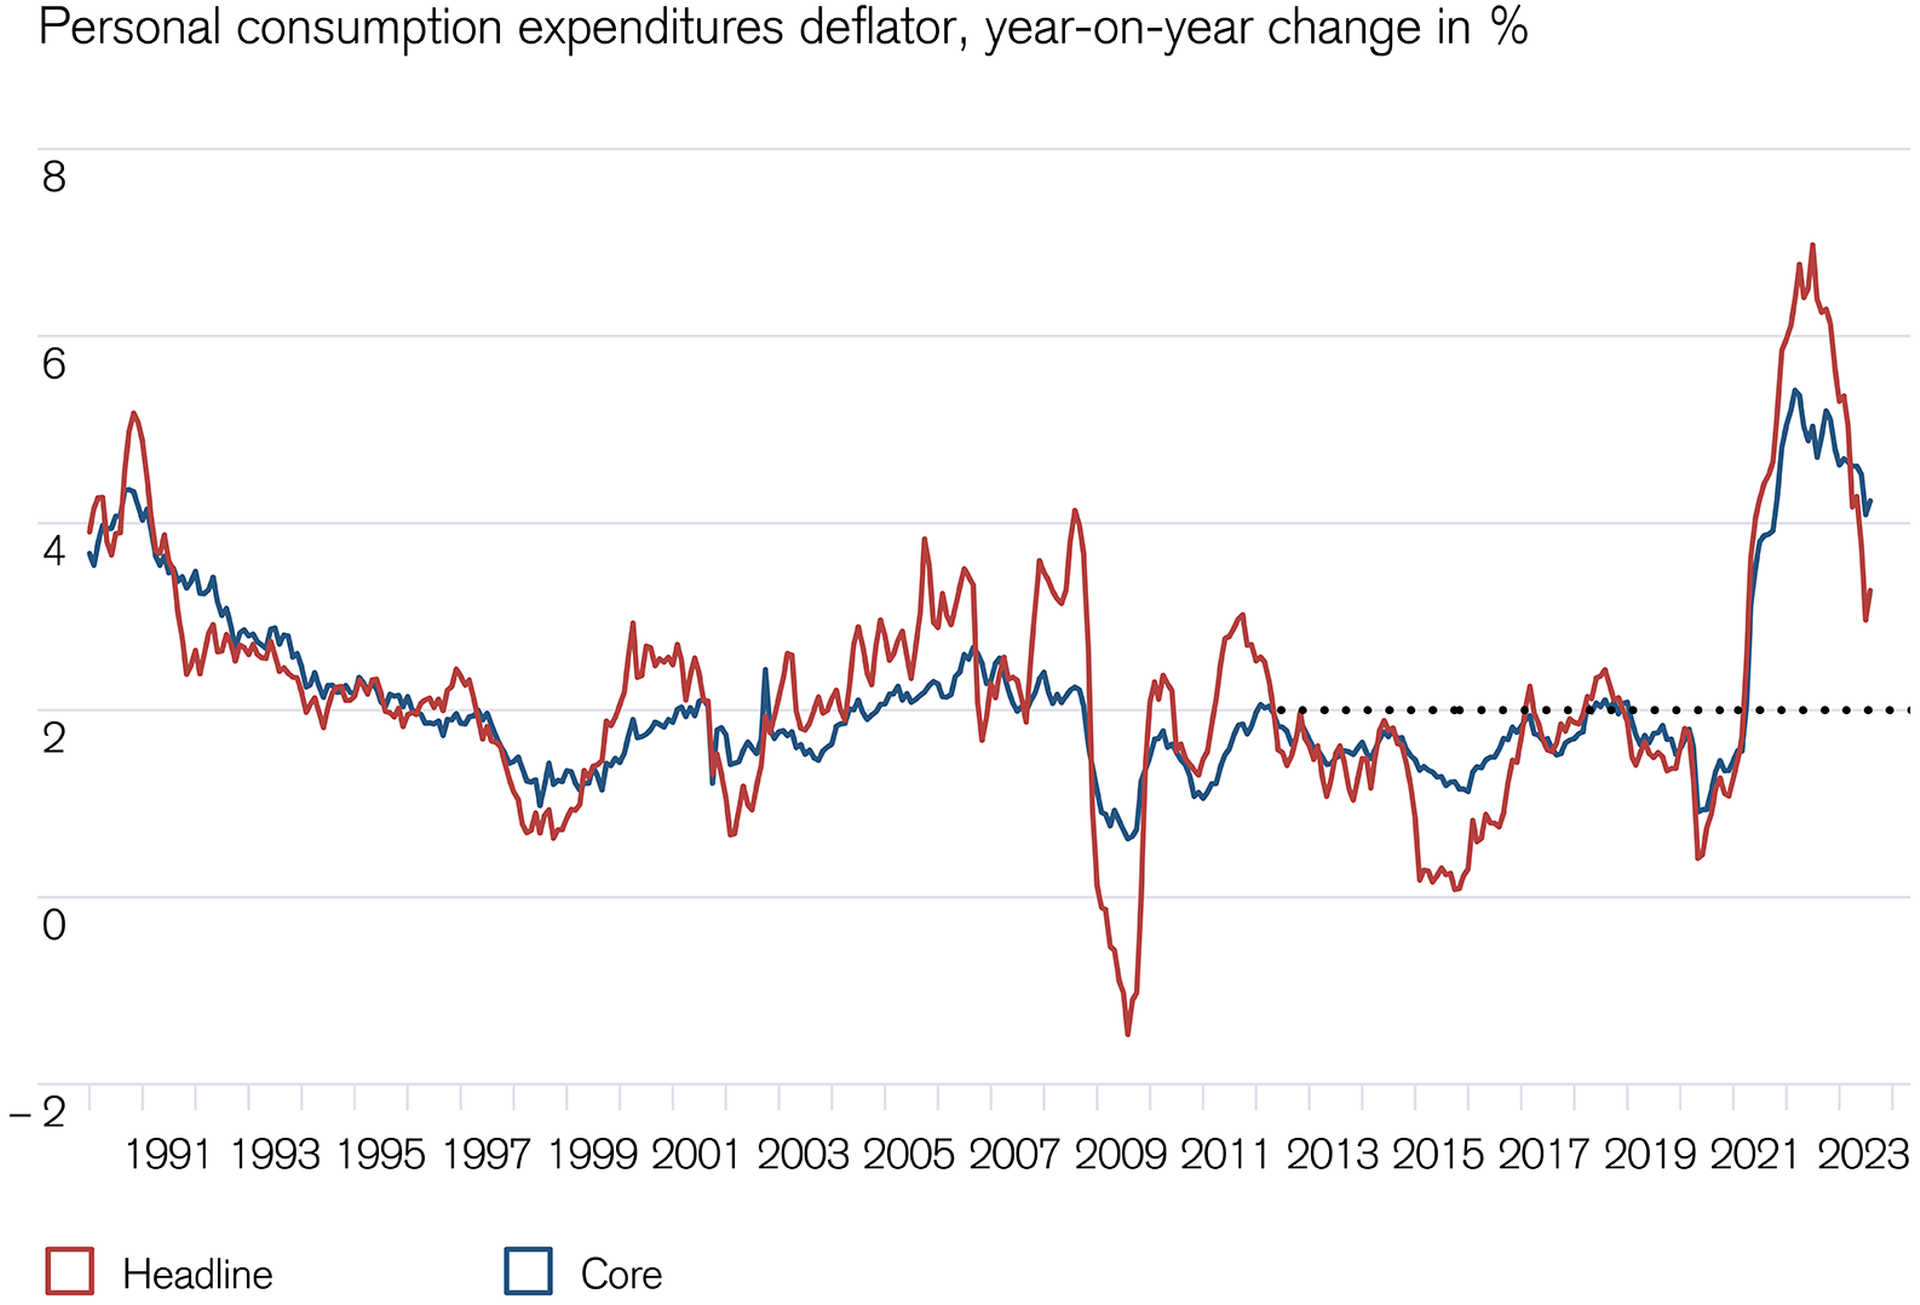 Economic trends: US core inflation is sinking